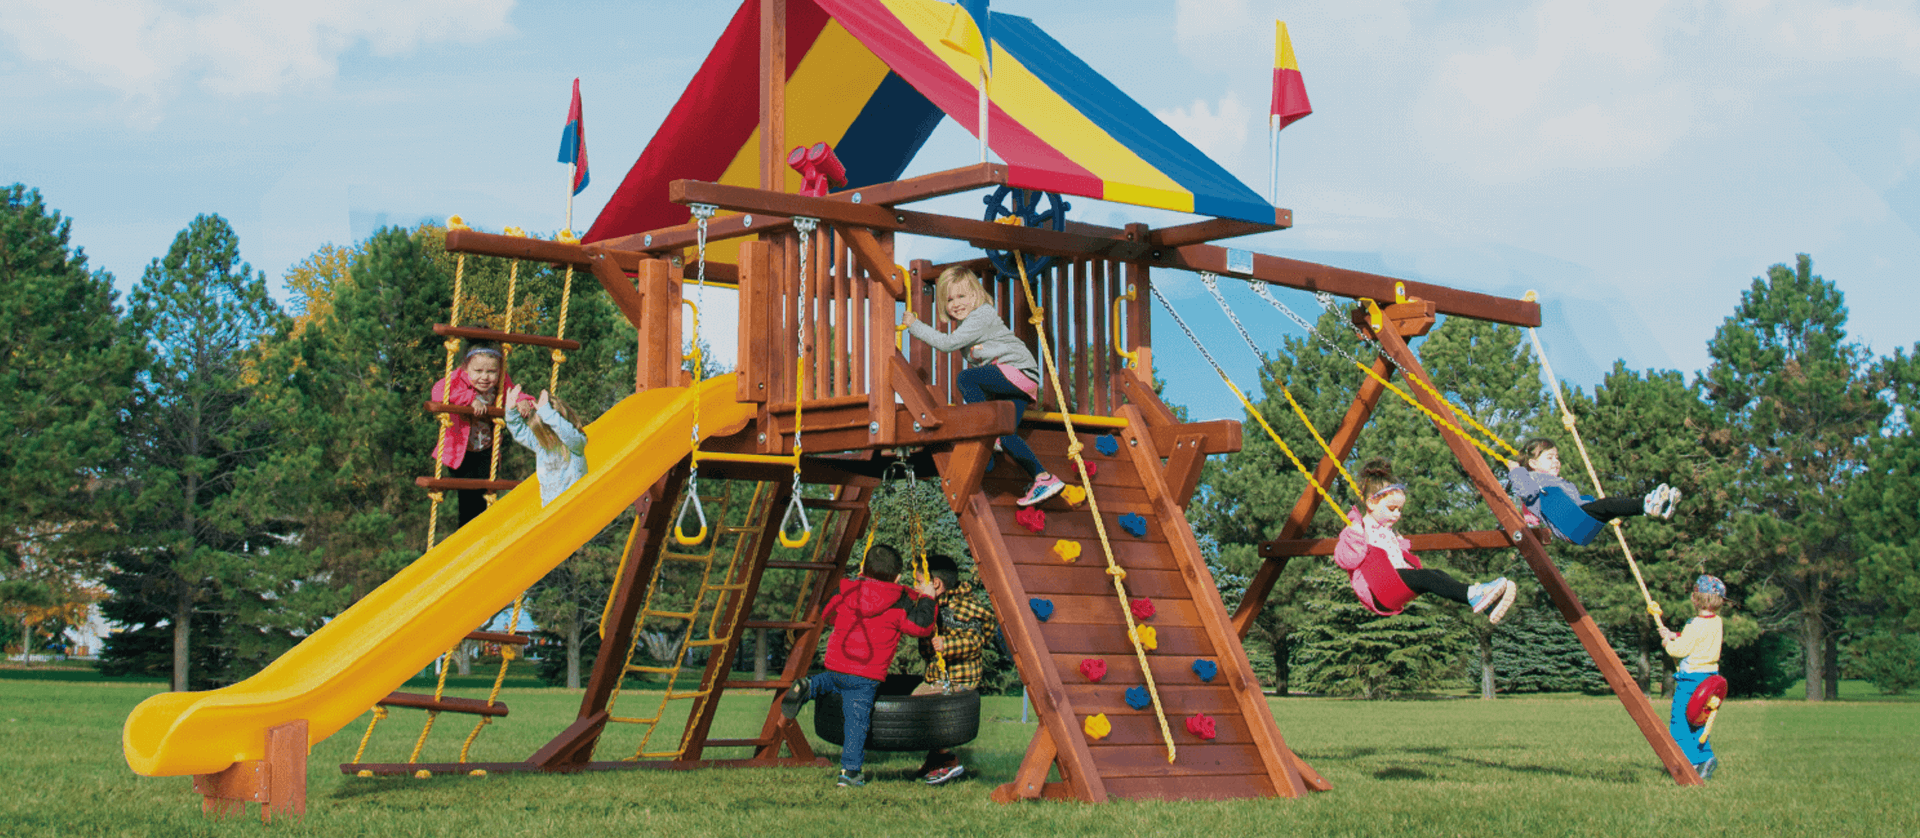 wooden playsets installation included